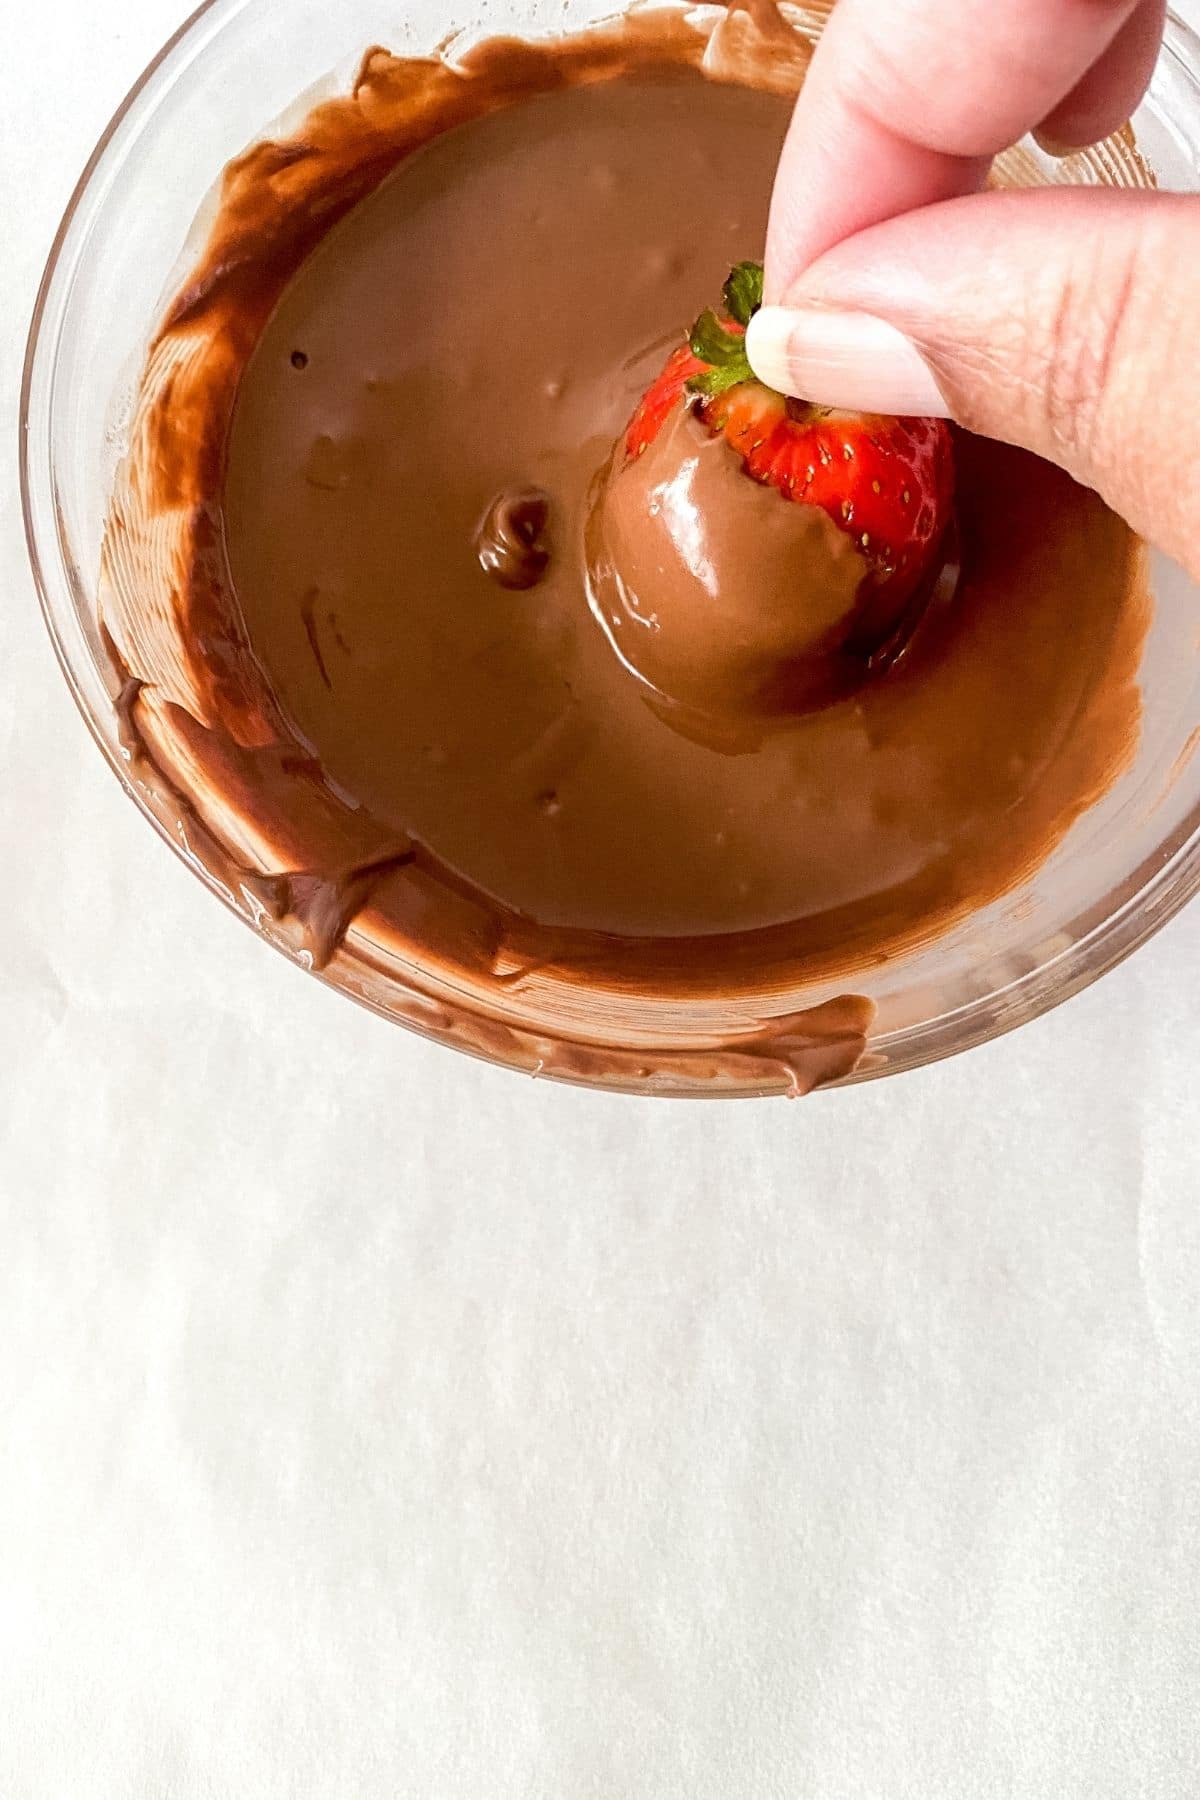 Dipping strawberry in chocolate